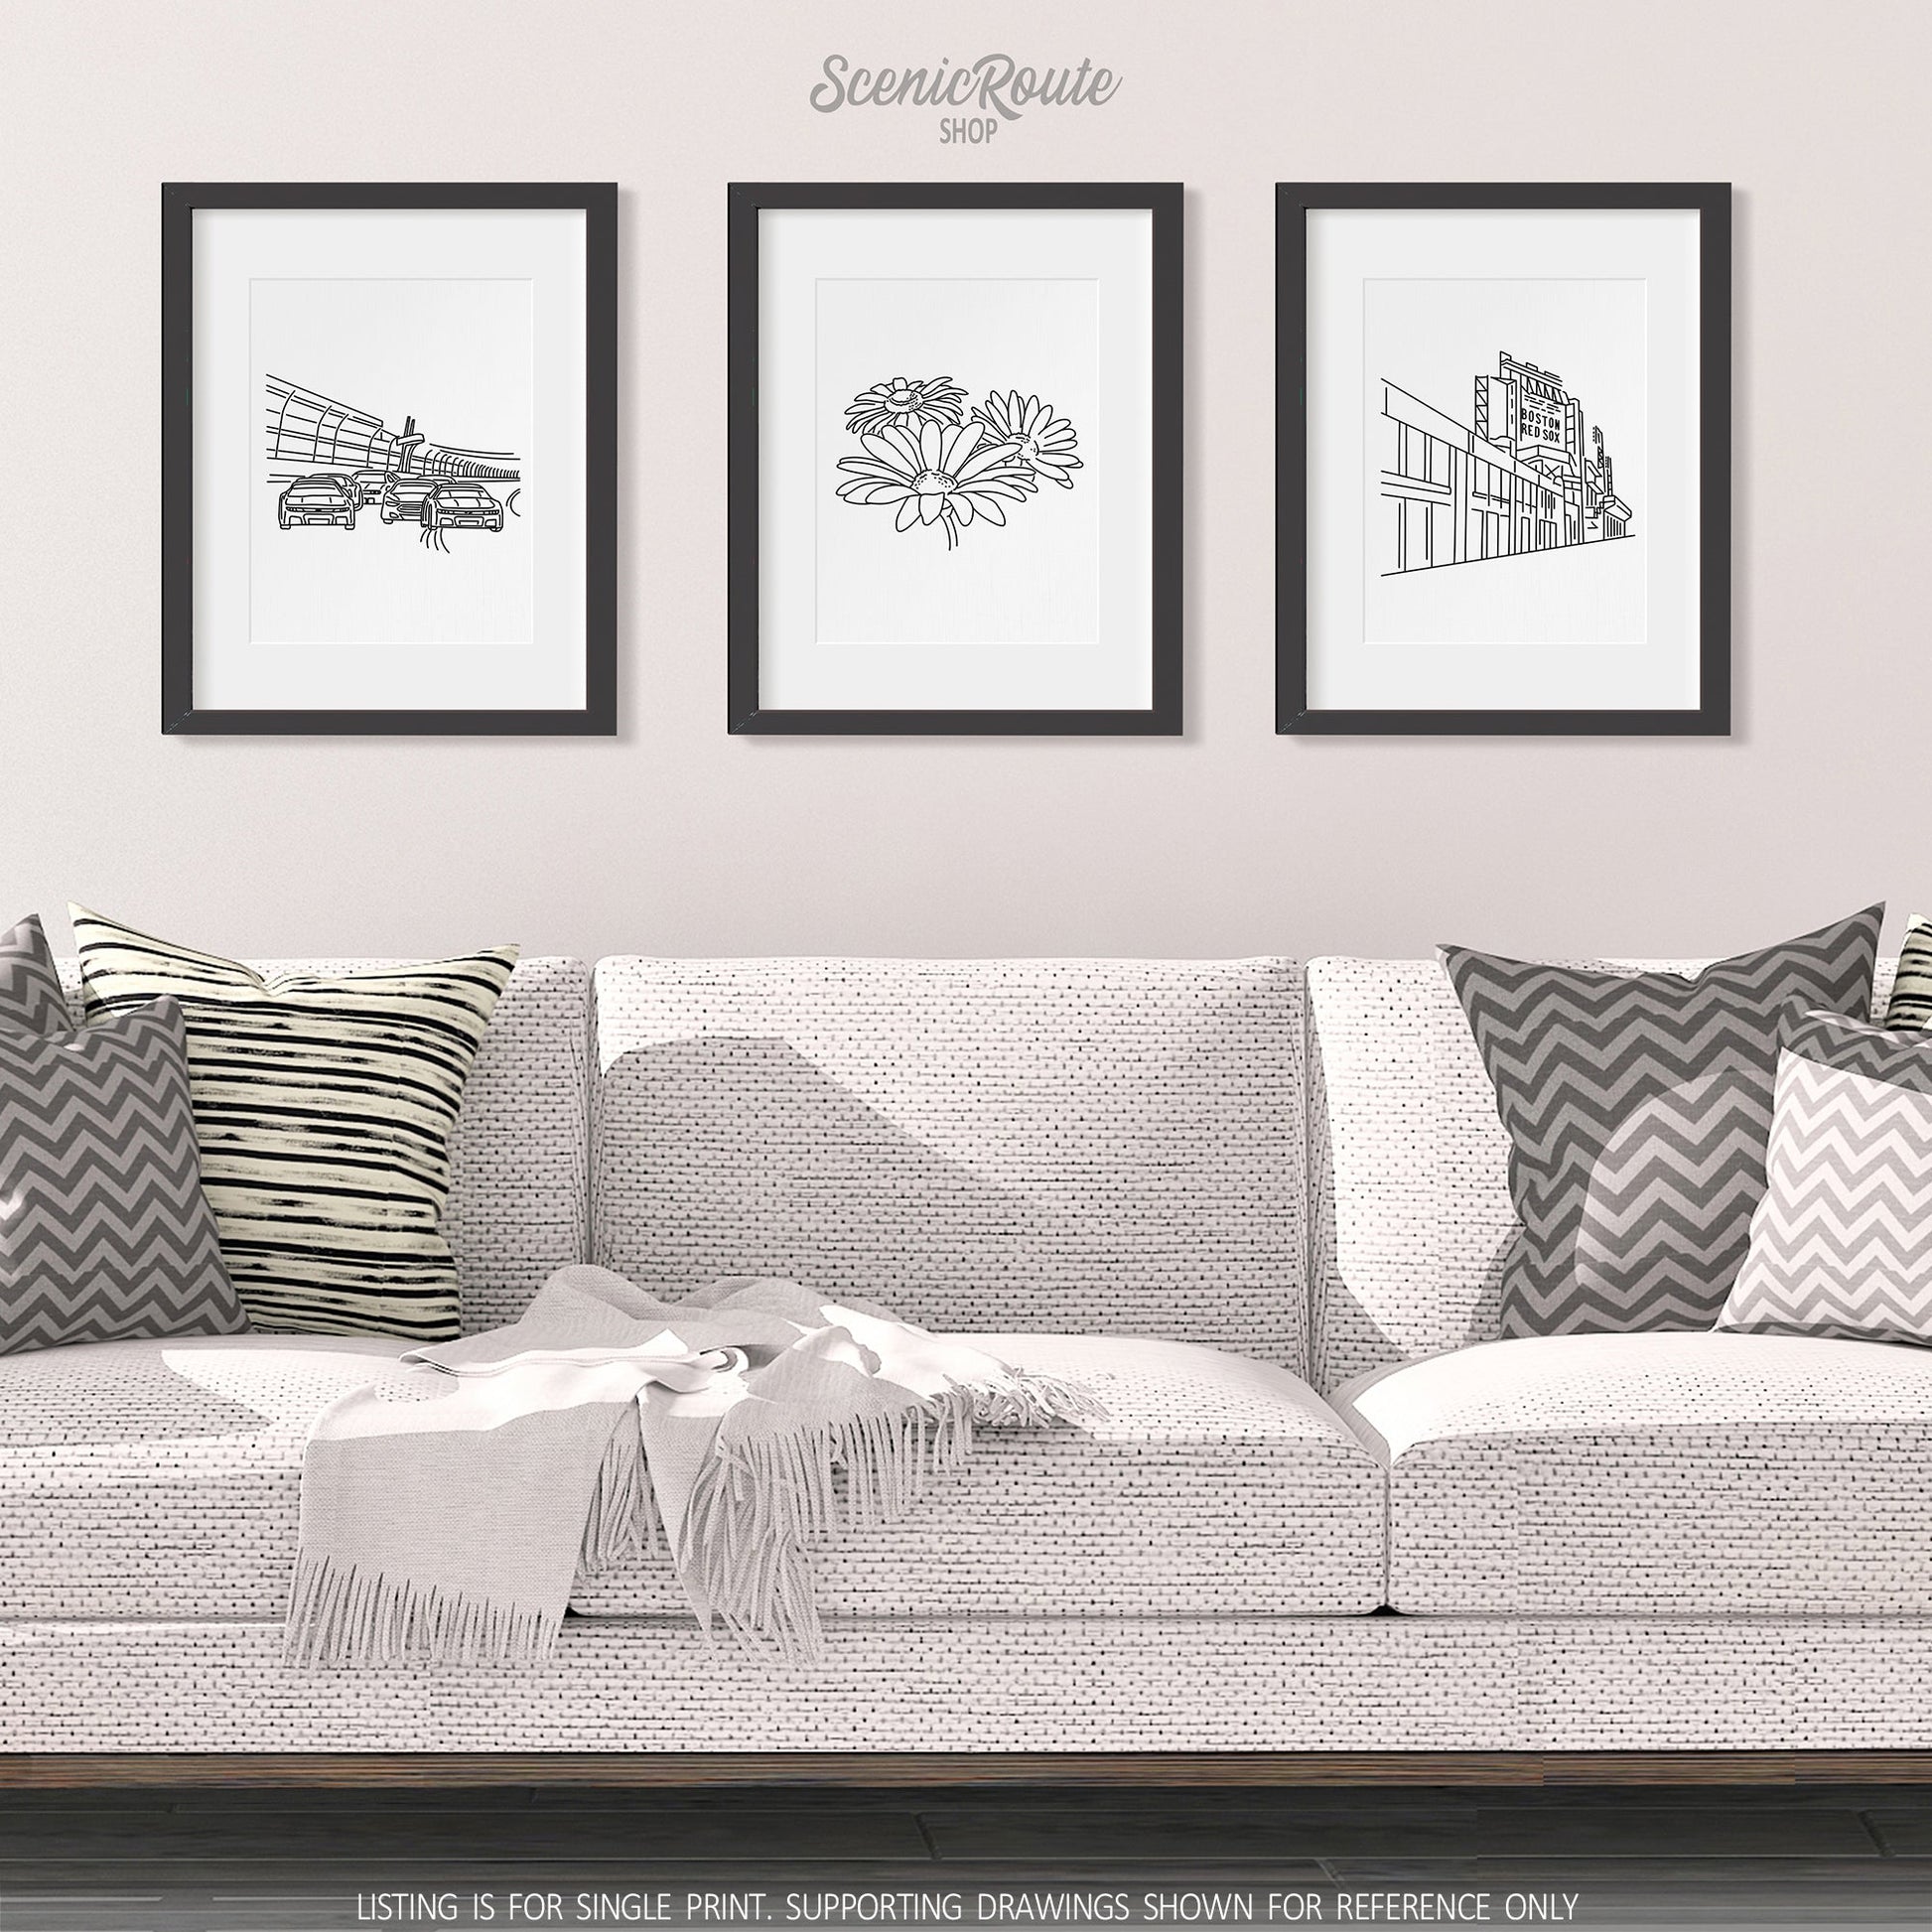 A group of three framed drawings on a white wall hanging above a couch with pillows and a blanket. The line art drawings include Nascar, a Daisy Flower, and Fenway Park